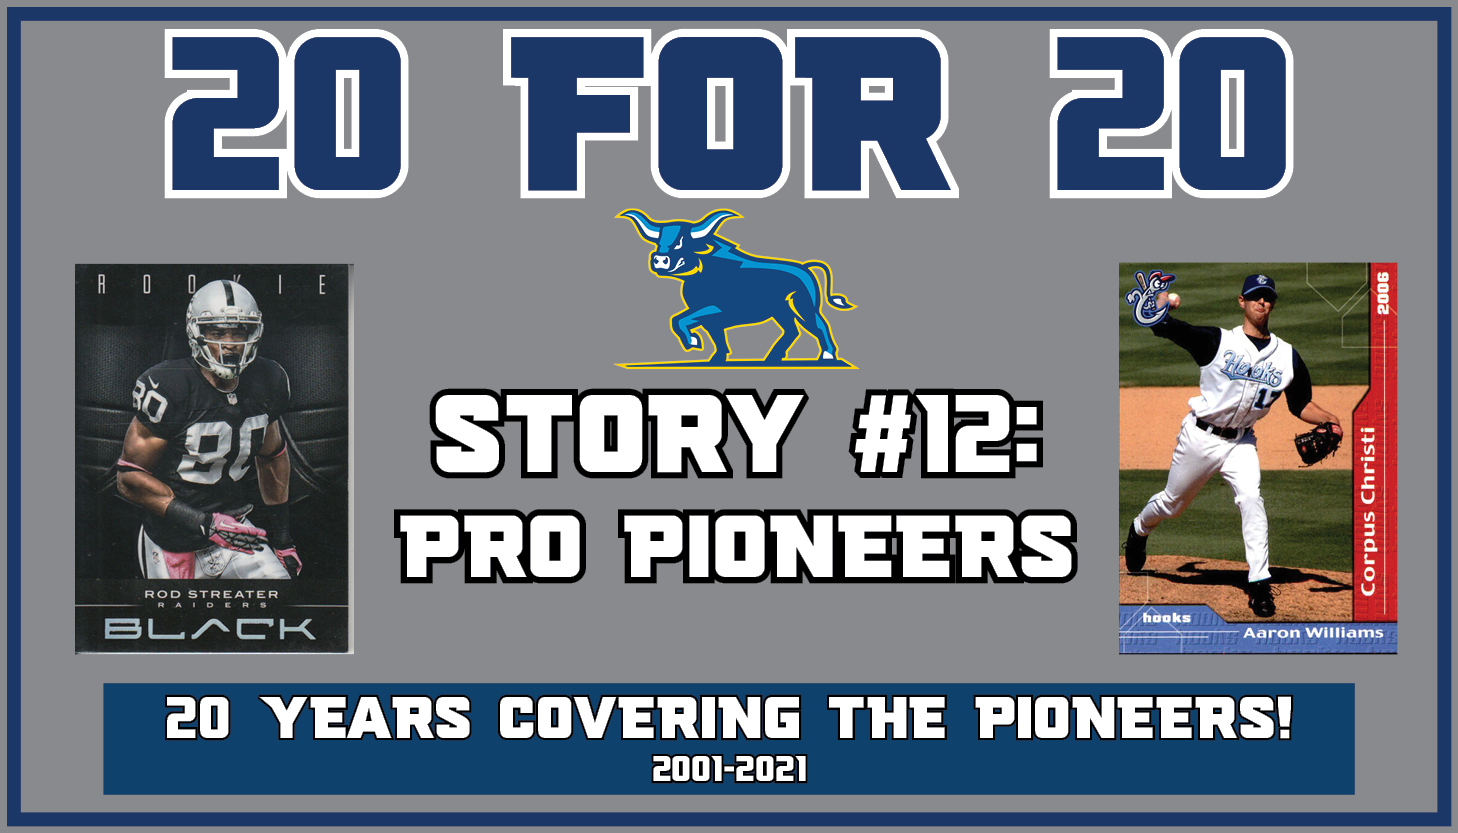 20 for 20 - Story 12 - Pro Pioneers
Picture features Rod Streater rookie card and Aaron Williams baseball card.